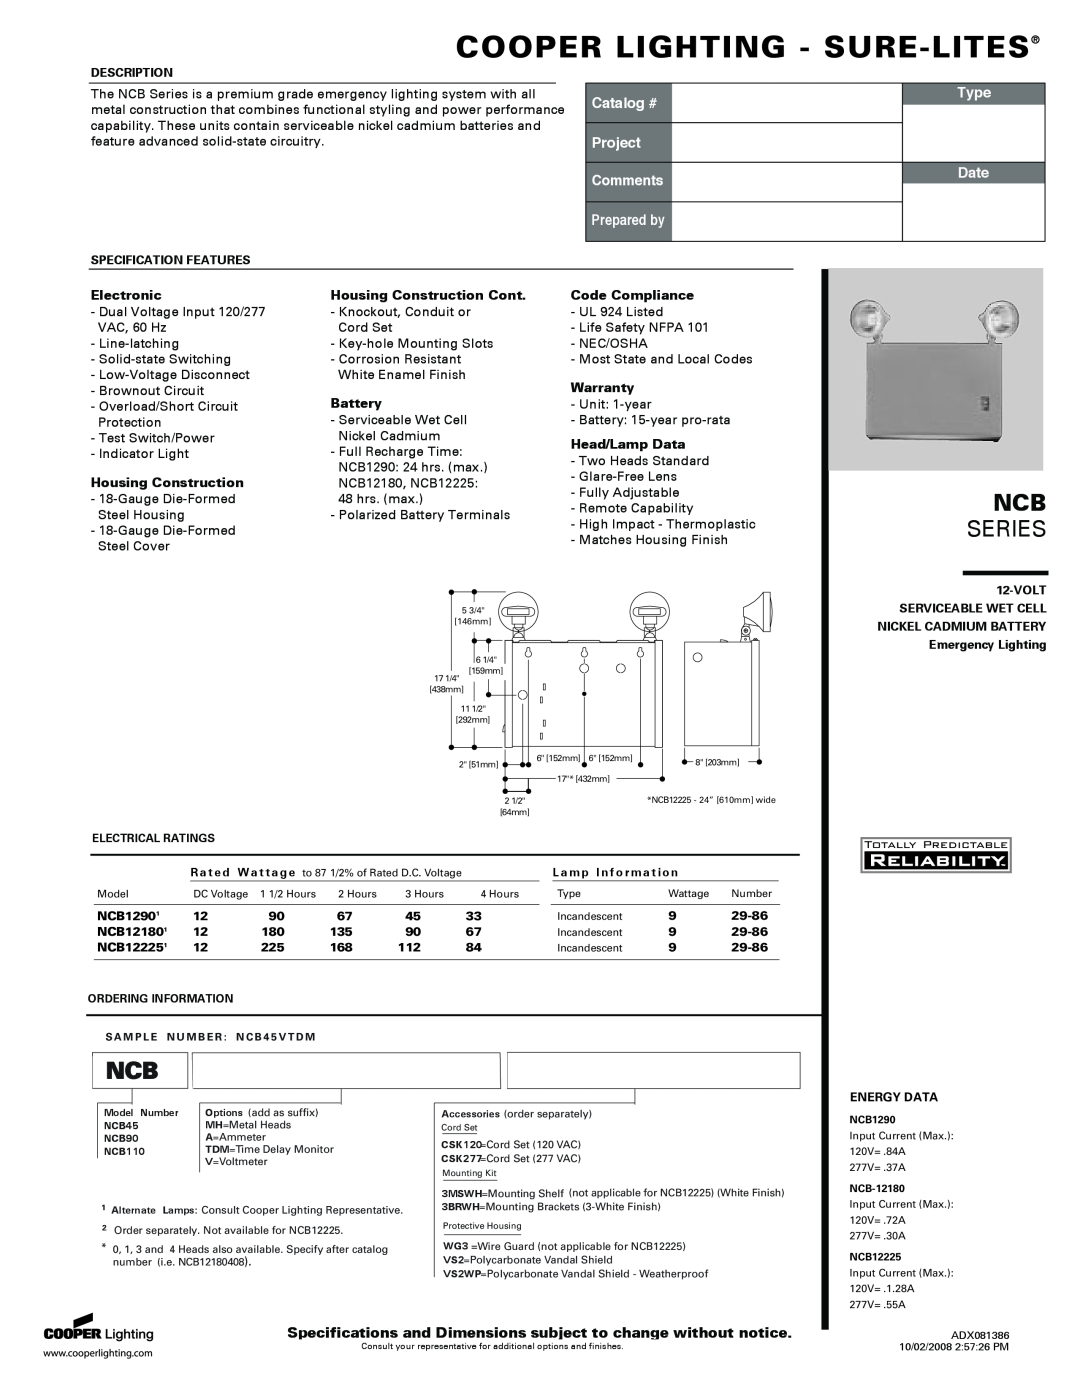 Cooper Lighting NCB specifications Specifications and Dimensions subject to change without notice, Series, Catalog #, Type 